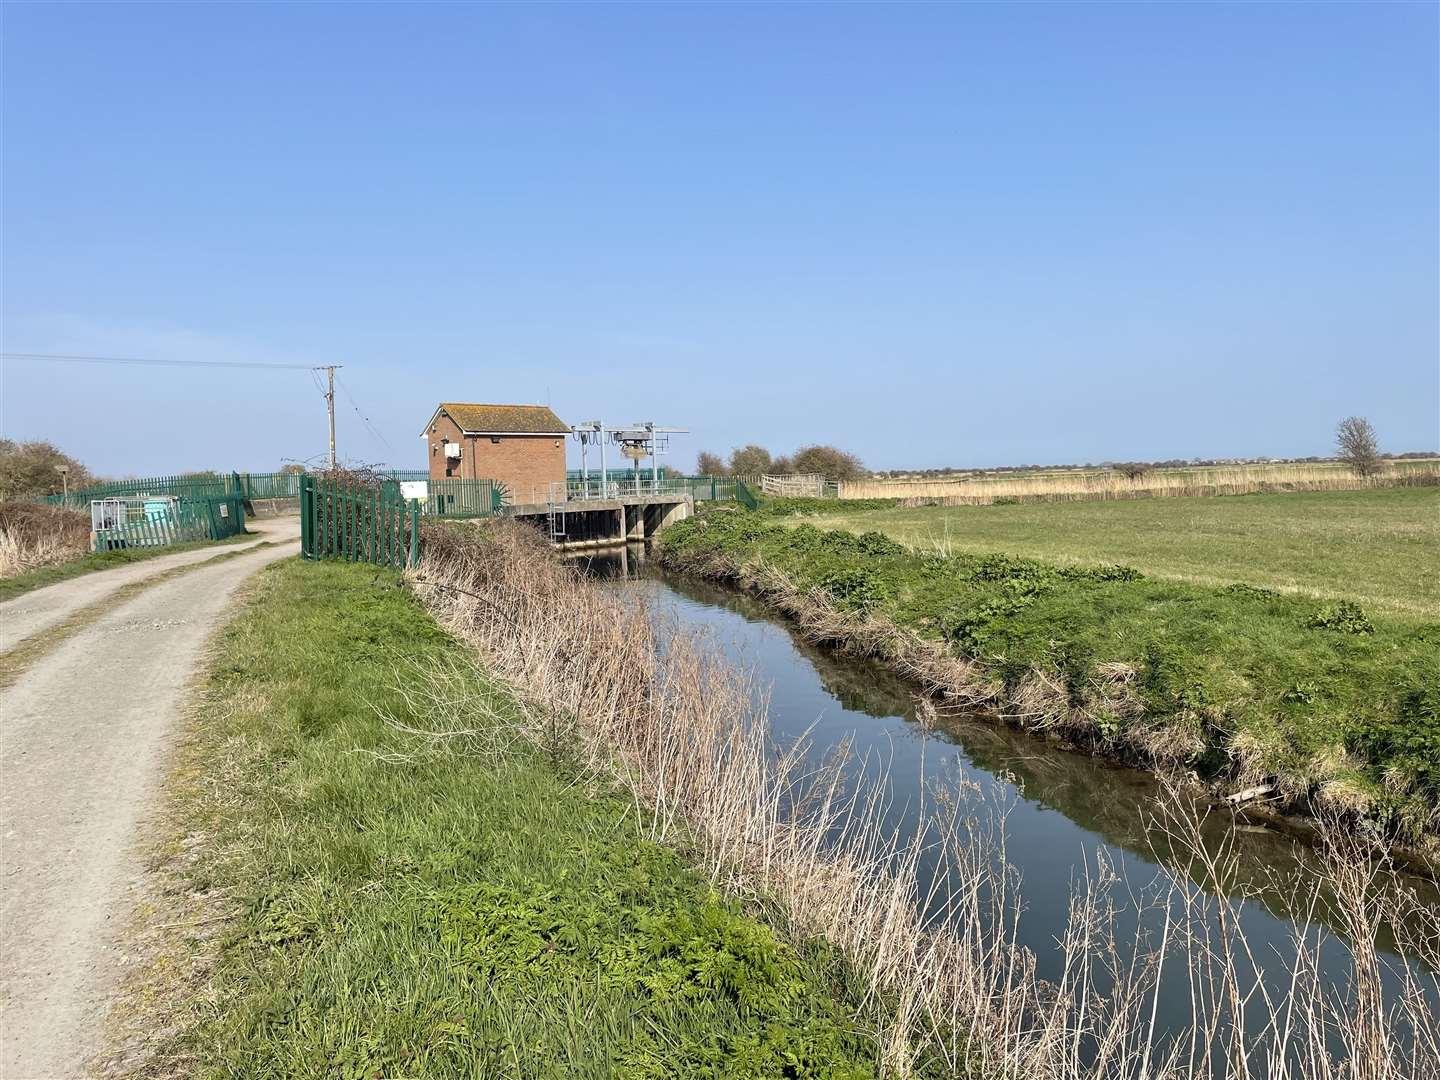 Alex Holland's body was found in water by Hacklinge pumping station